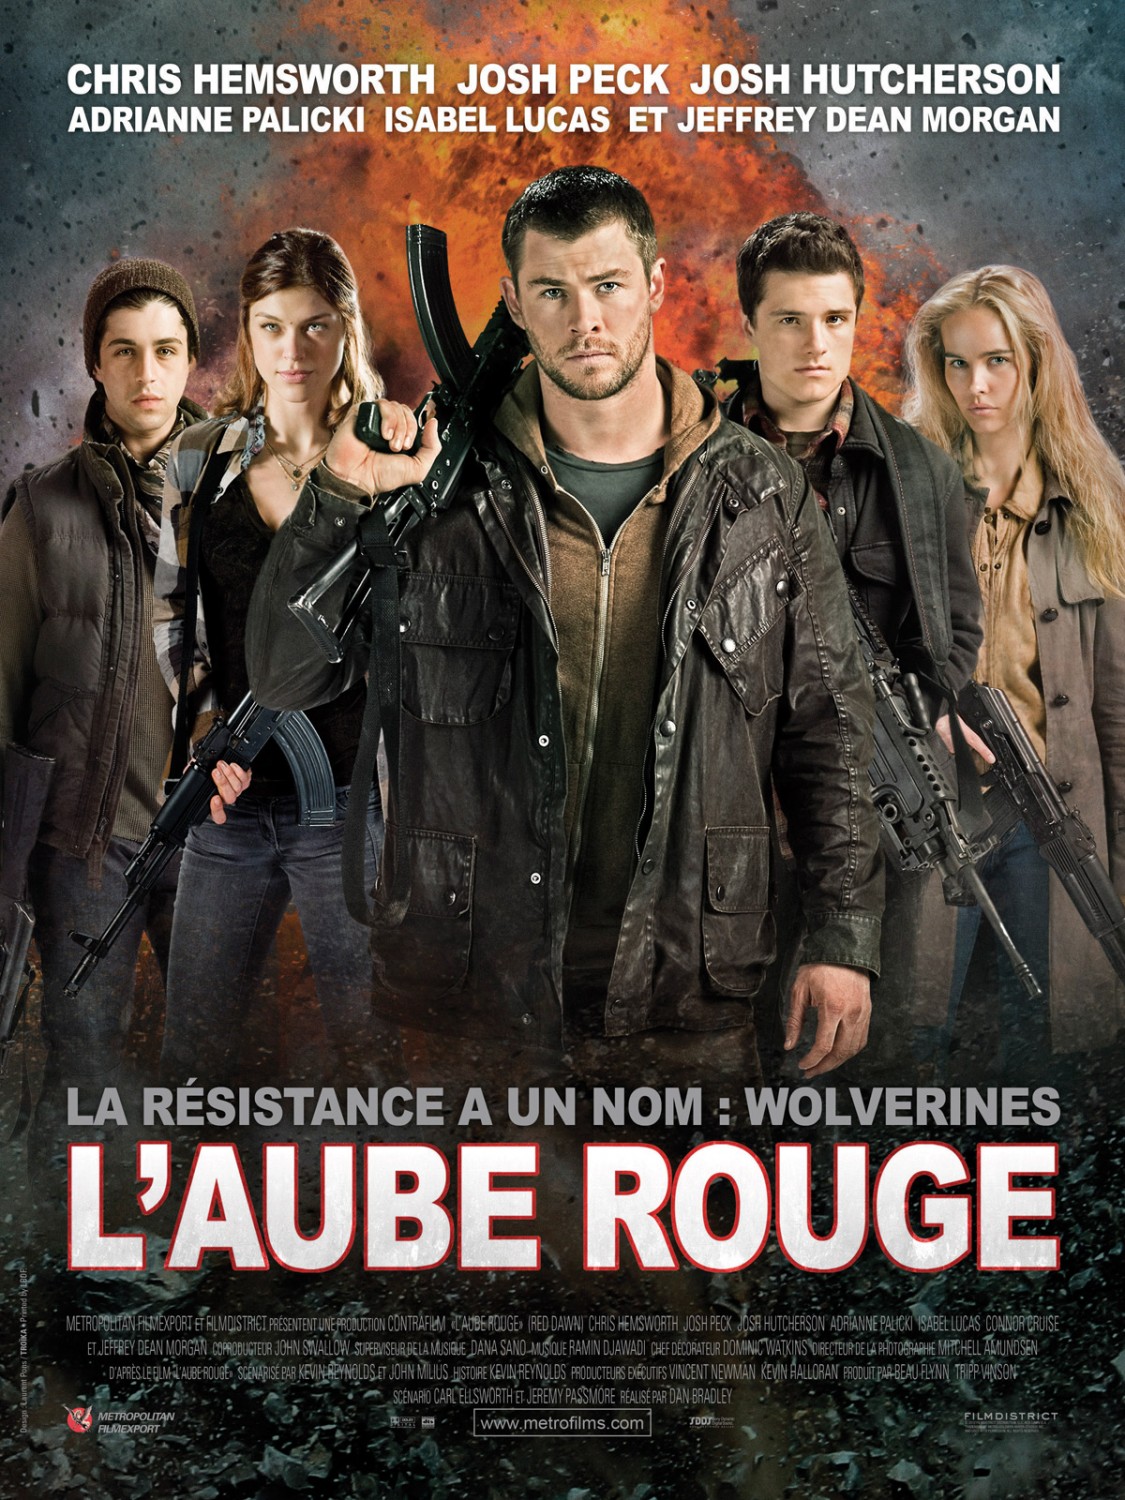 http://www.impawards.com/2012/posters/red_dawn_ver5_xlg.jpg